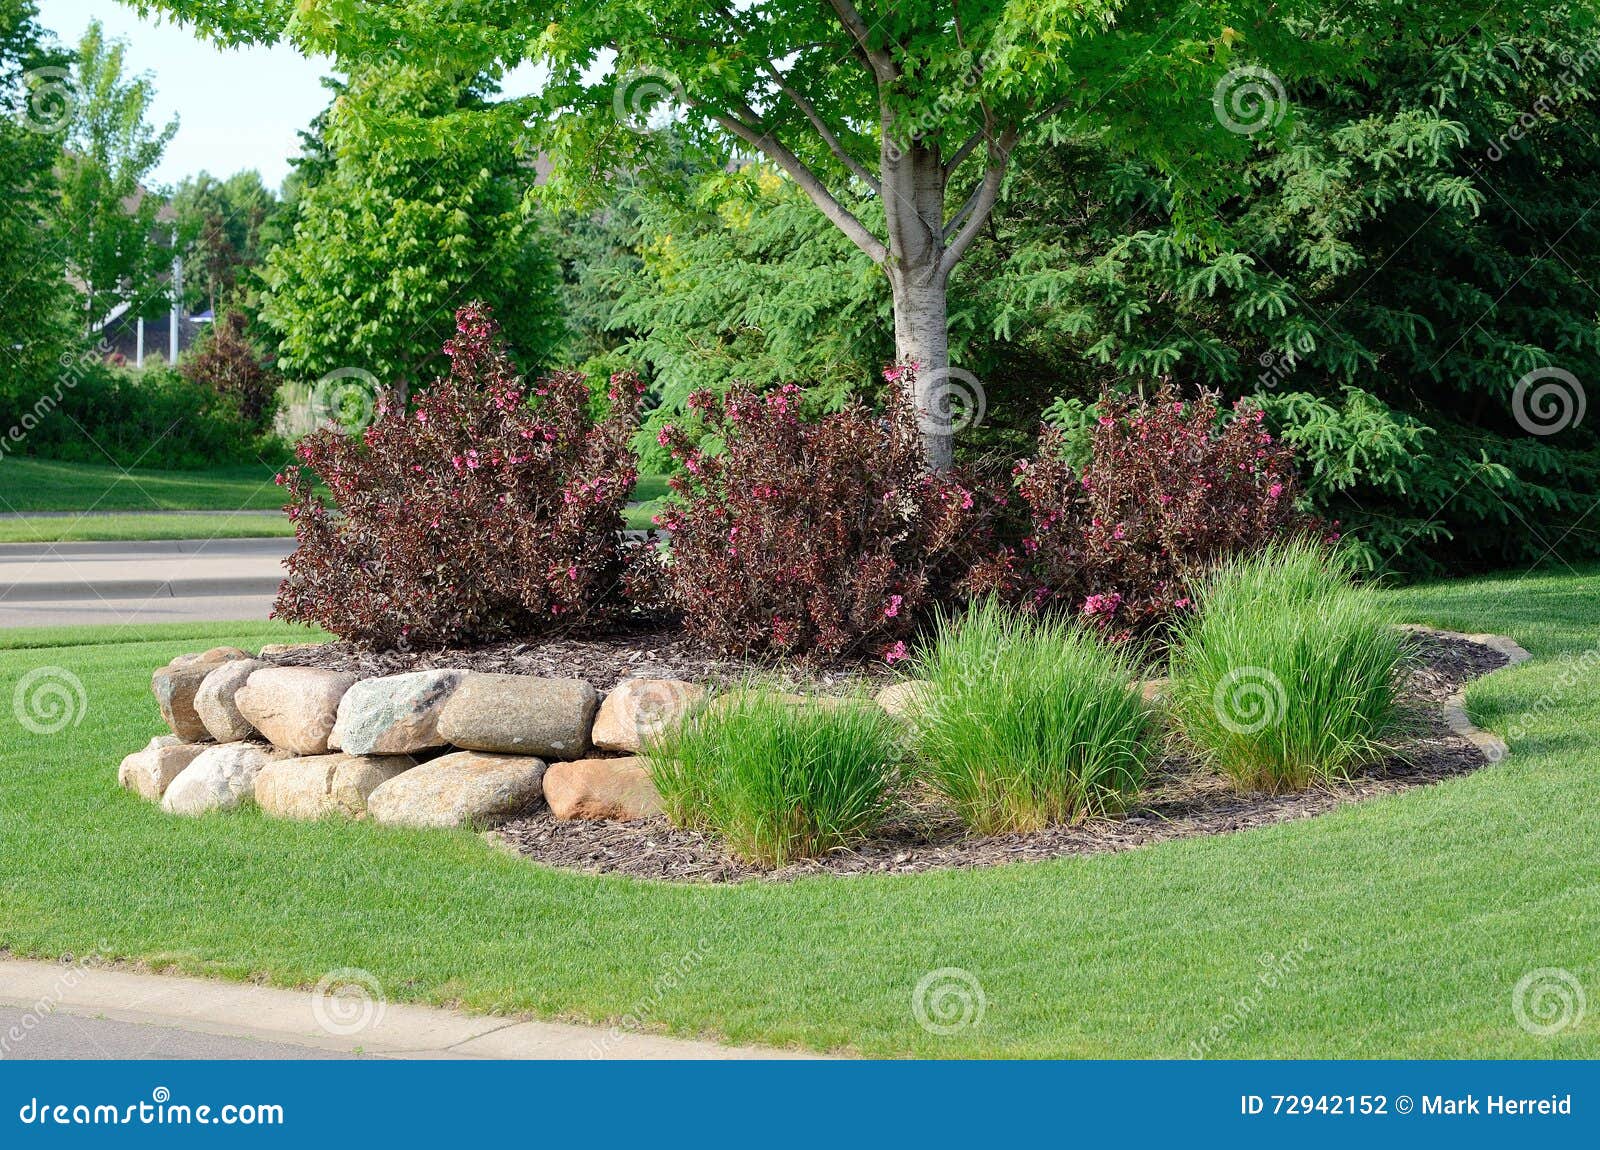 landscaping with weigela shrubs and rock retaining wall